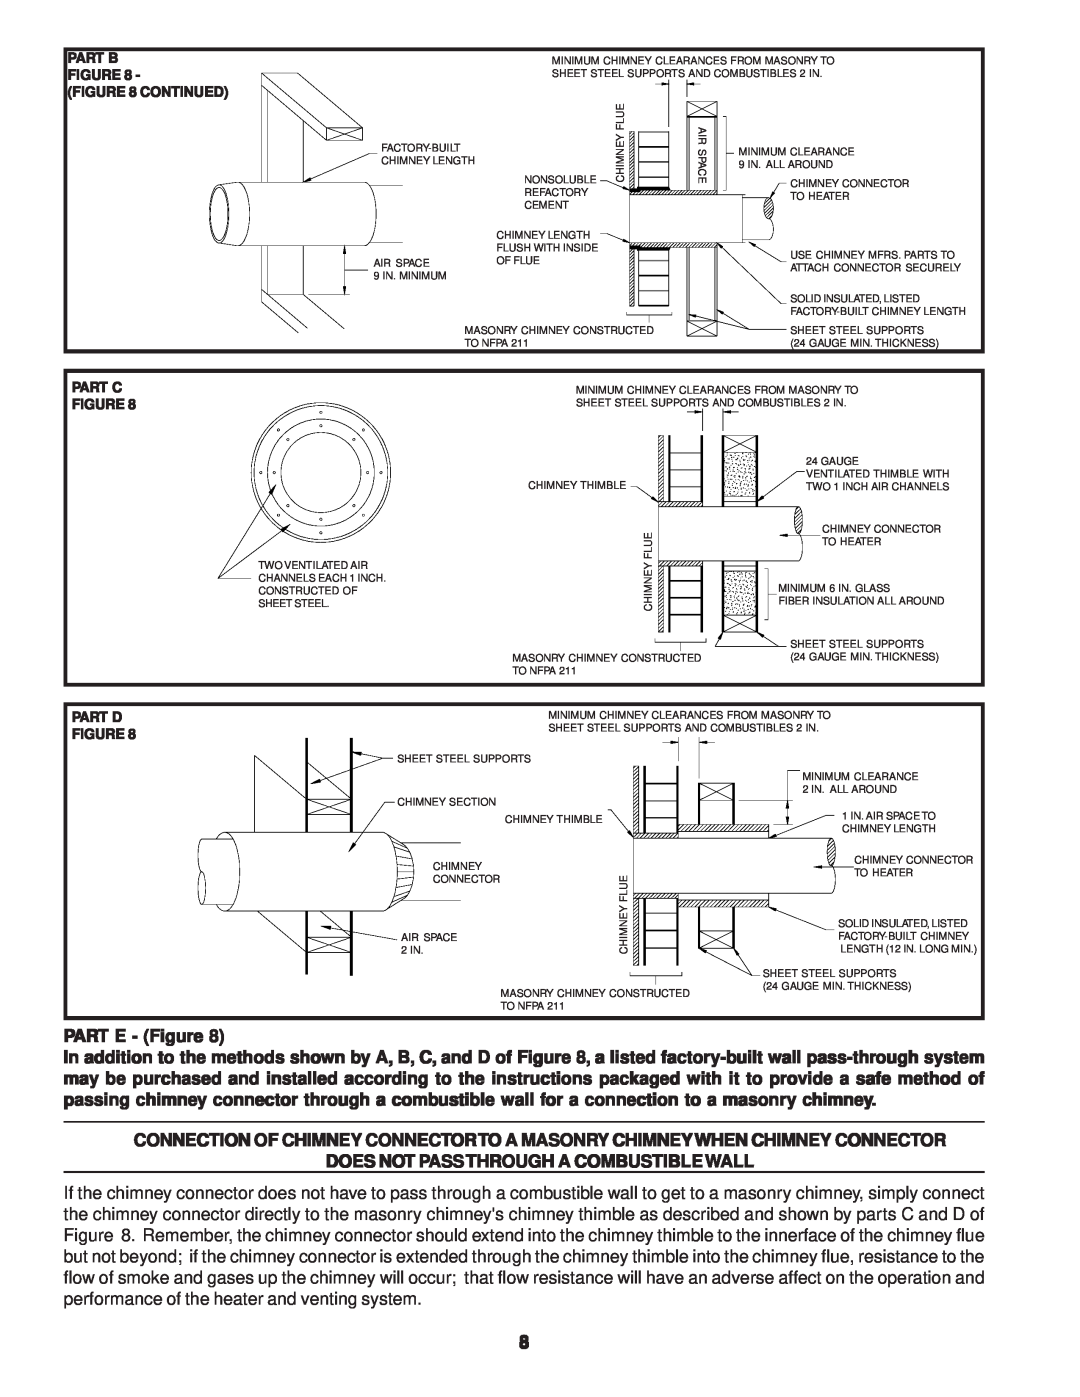 United States Stove C226 PART E - Figure, Does Not Passthrough A Combustiblewall, Part B Figure Continued, Part C Figure 